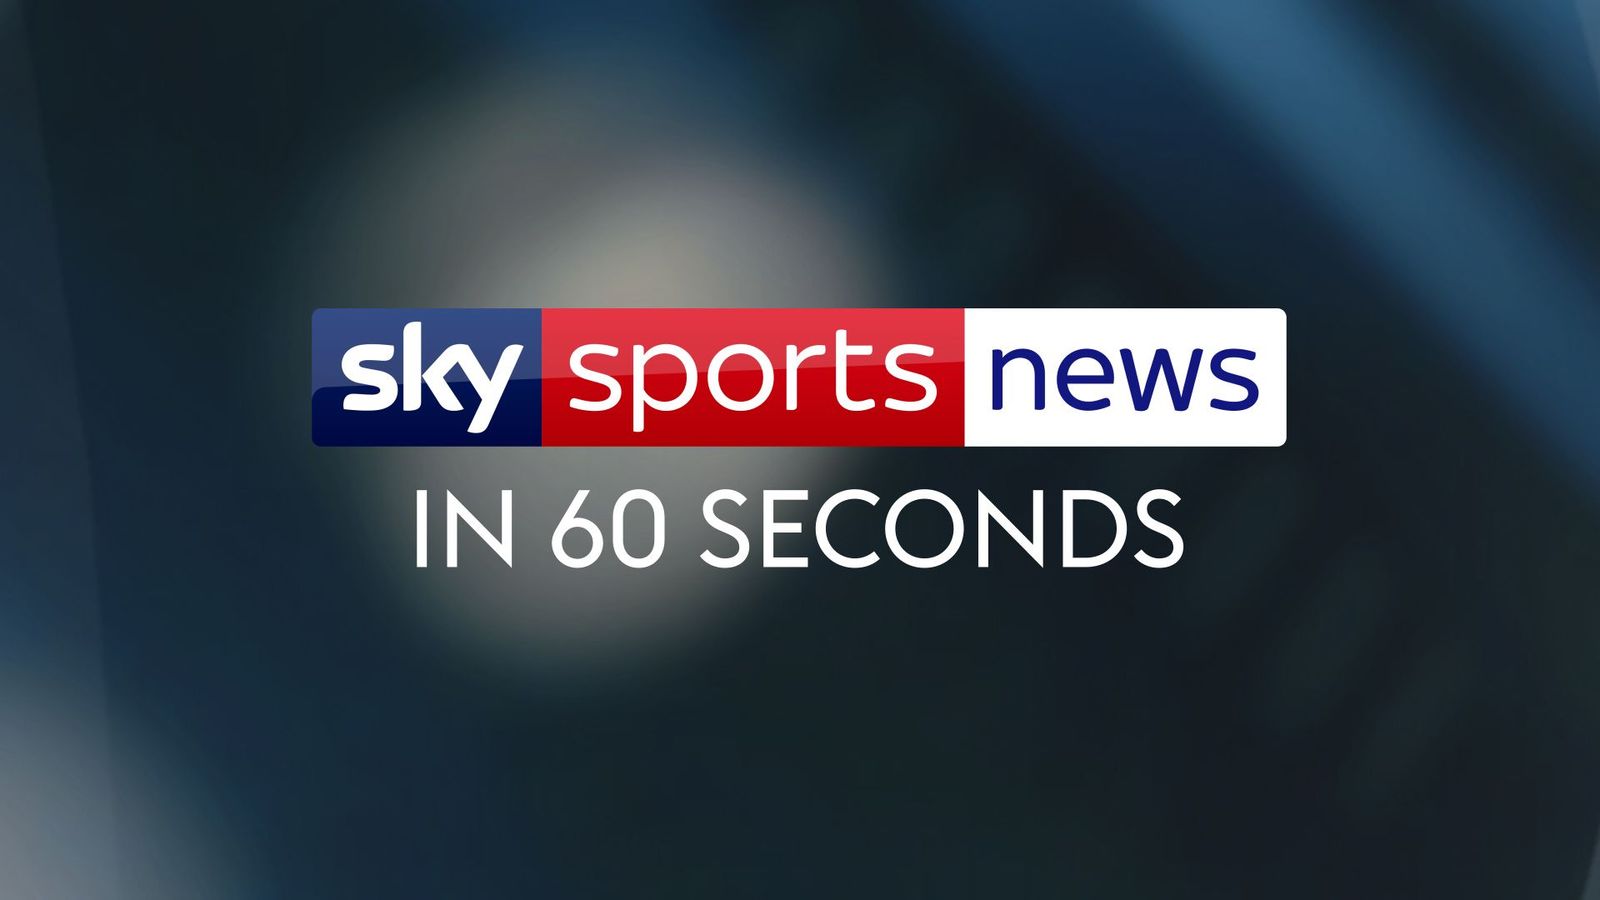 Skysports ssn in 60 seconds 4377918